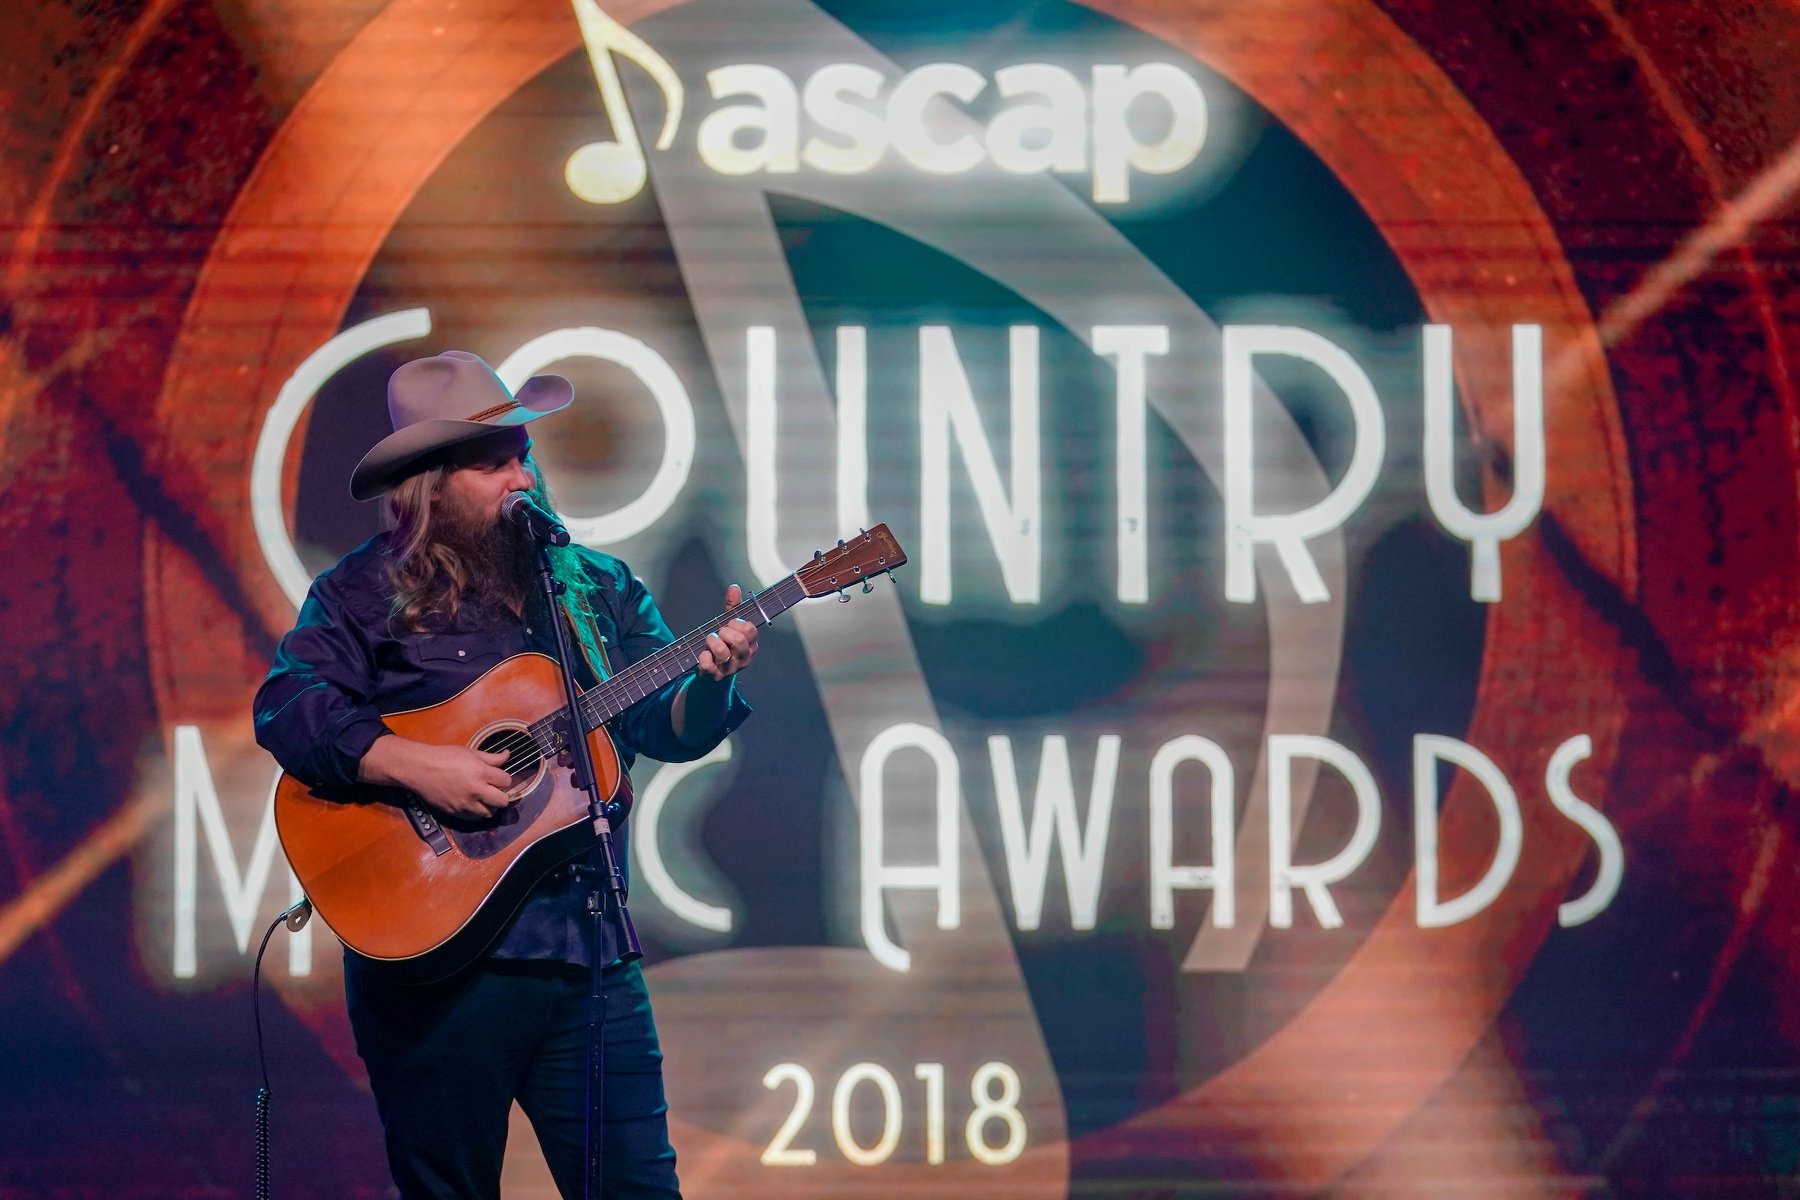 56th Annual ASCAP Country Music Awards Takes Over Nashville Ahead of CMA Awards